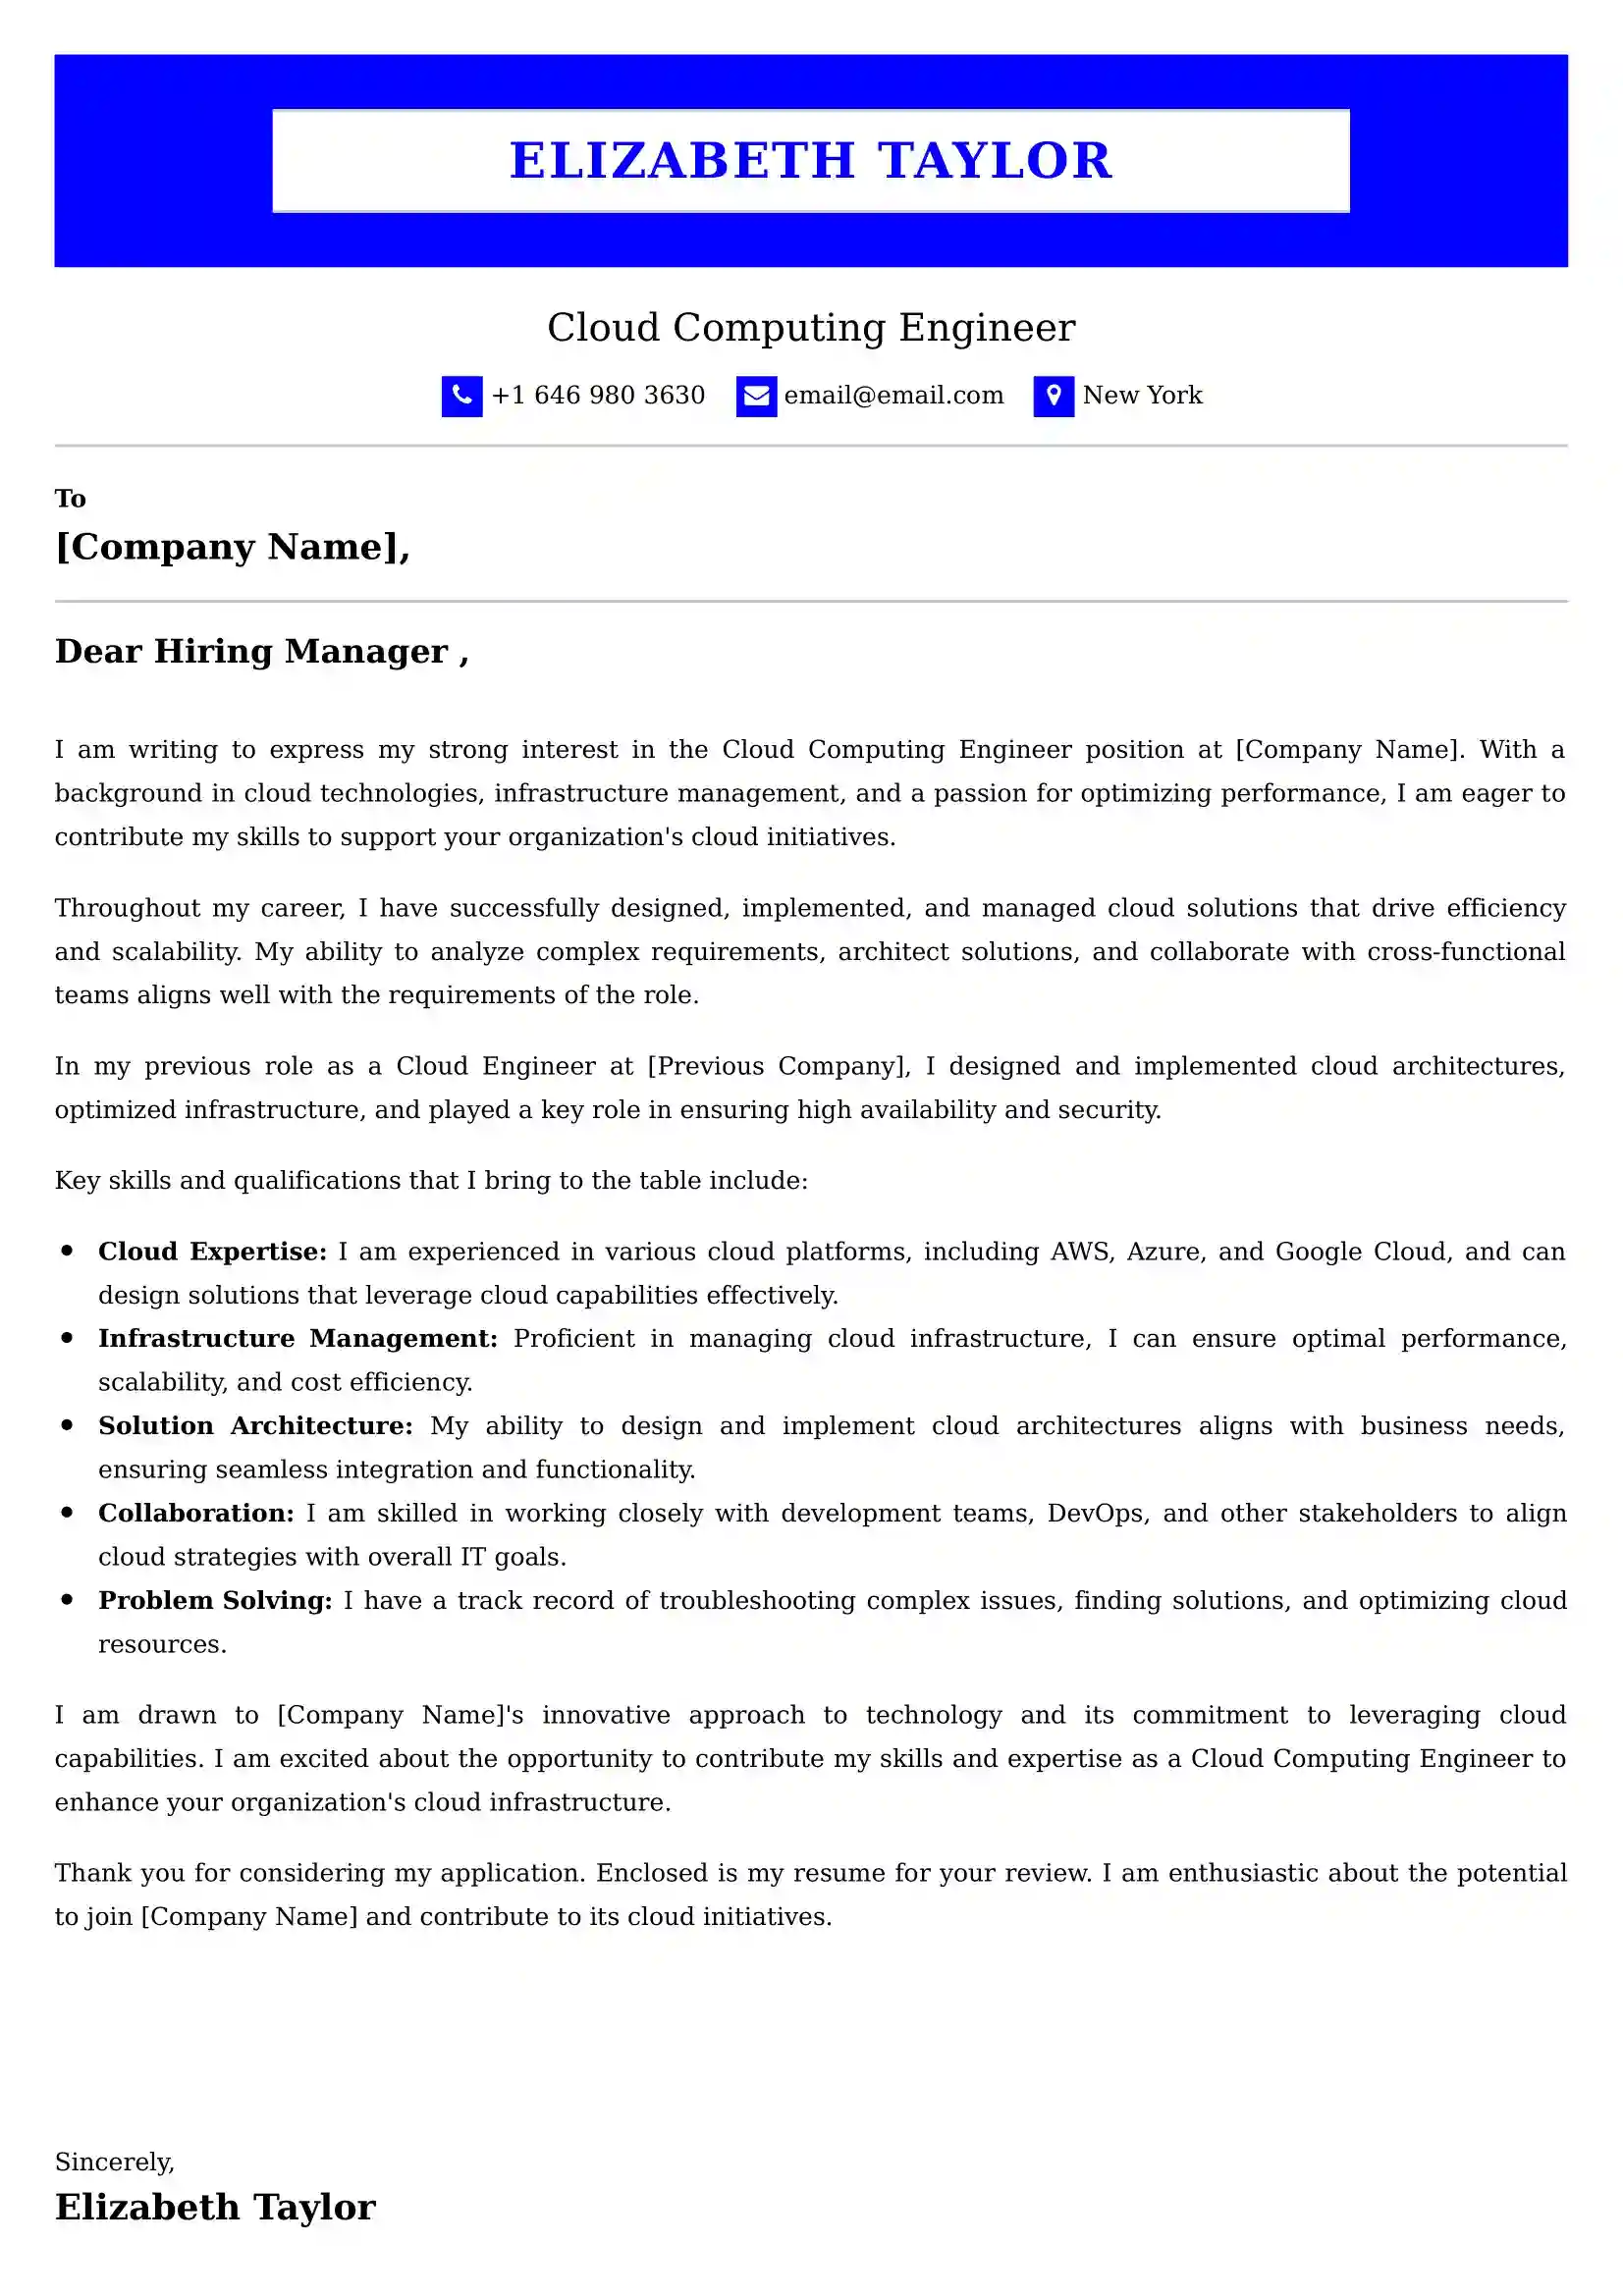 Cloud Computing Engineer Cover Letter Examples - Latest UK Format